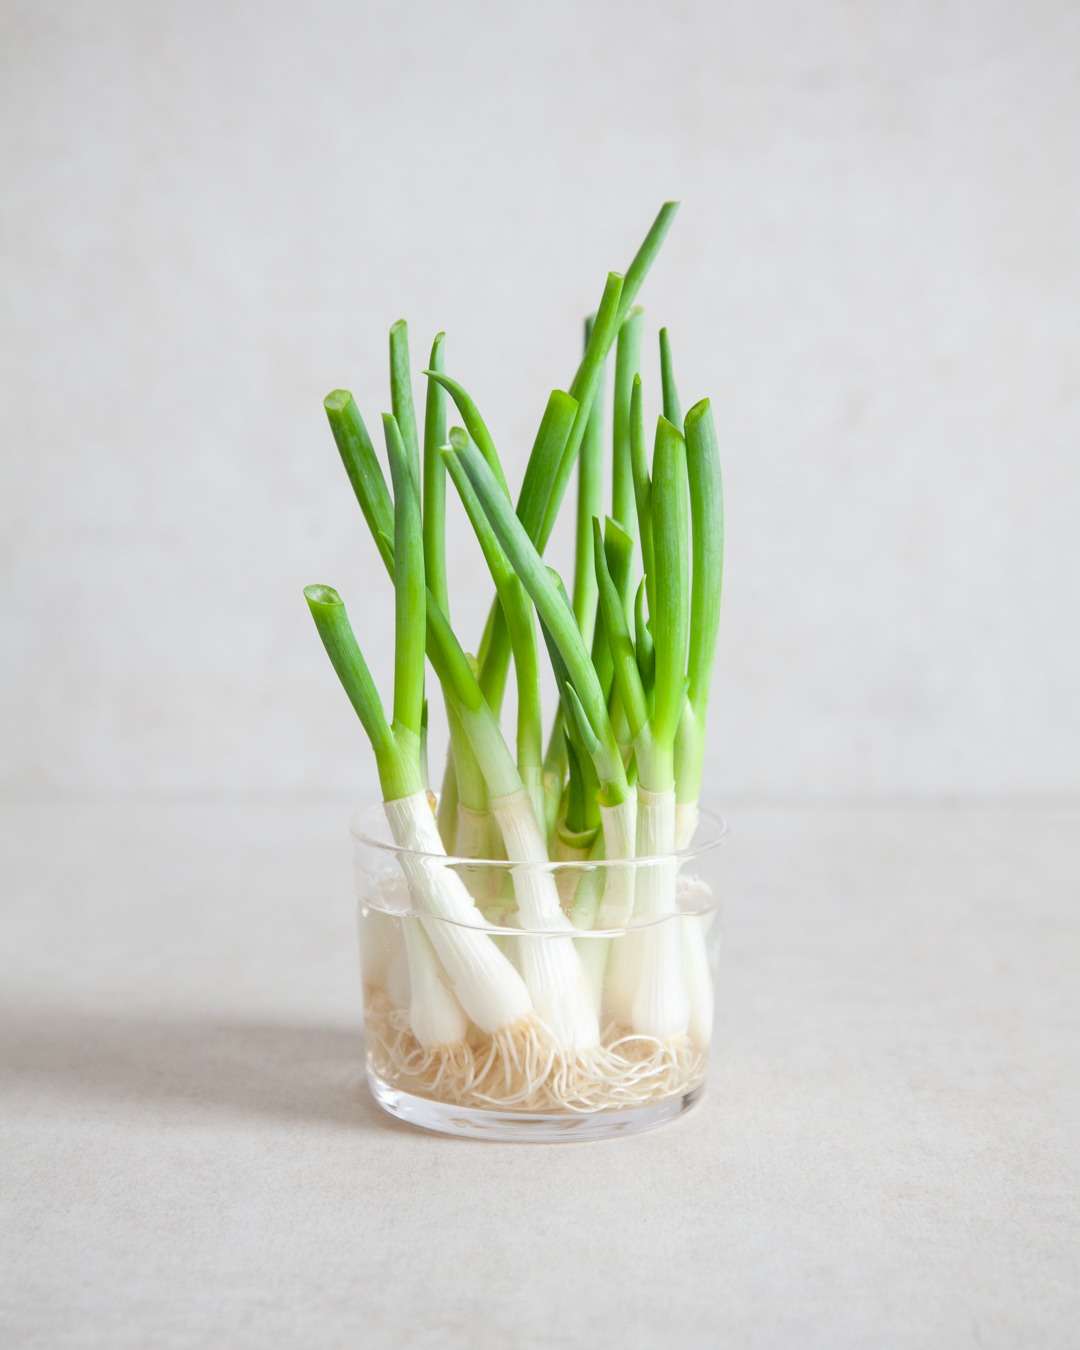 How to Regrow Spring Onions